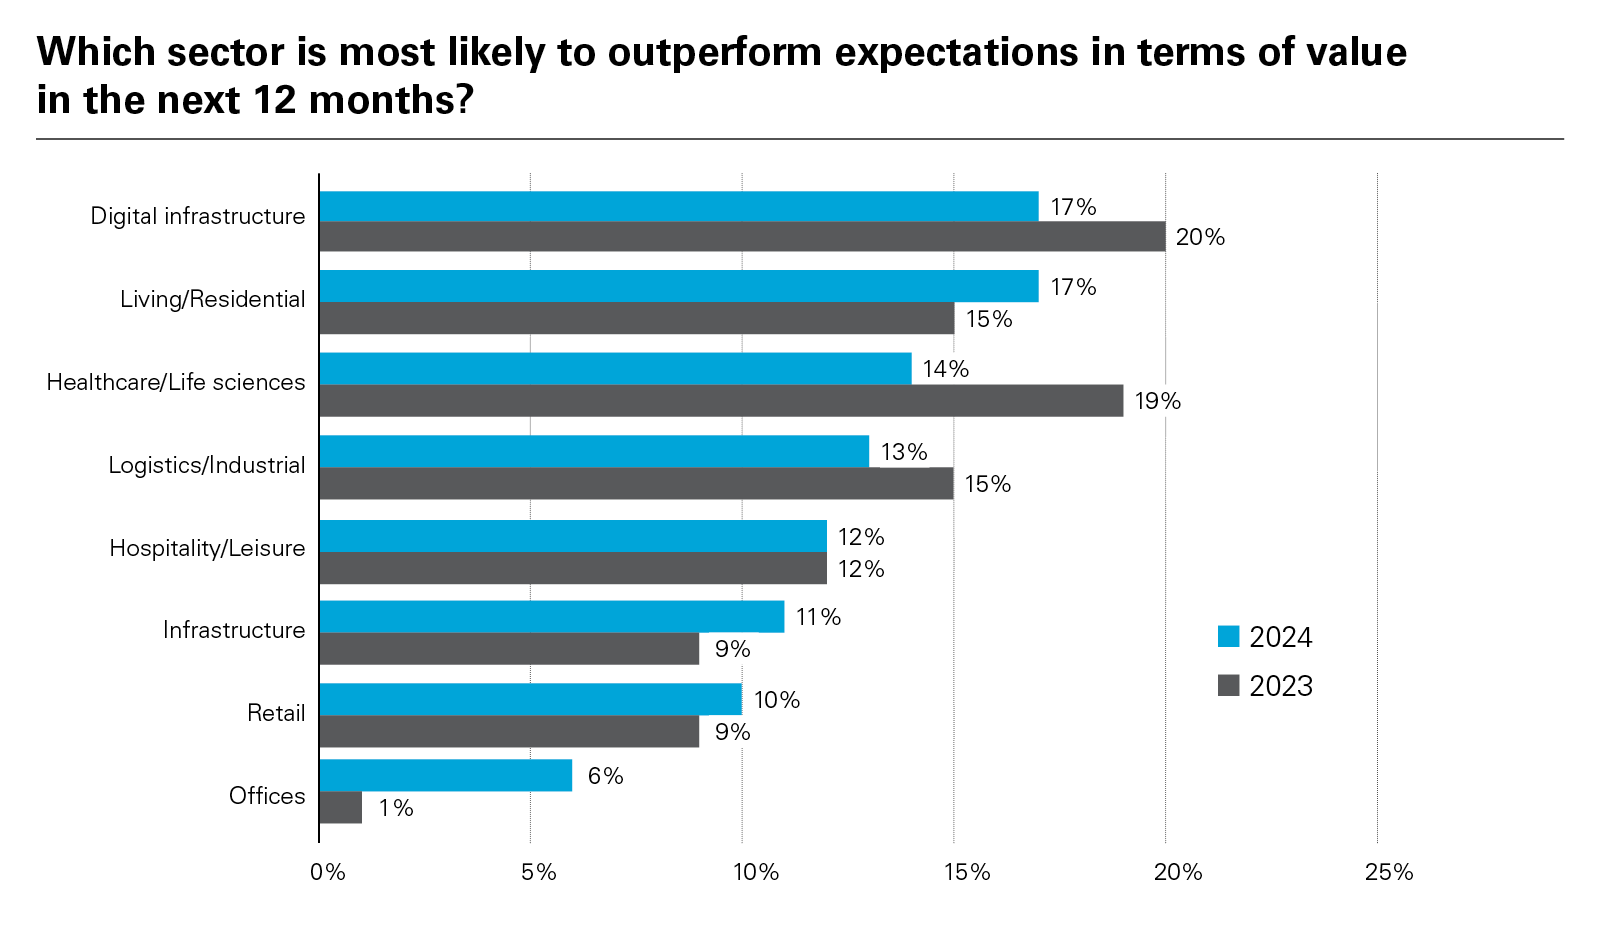 Which sector is most likely to outperform expectations in terms of value in the next 12 months?